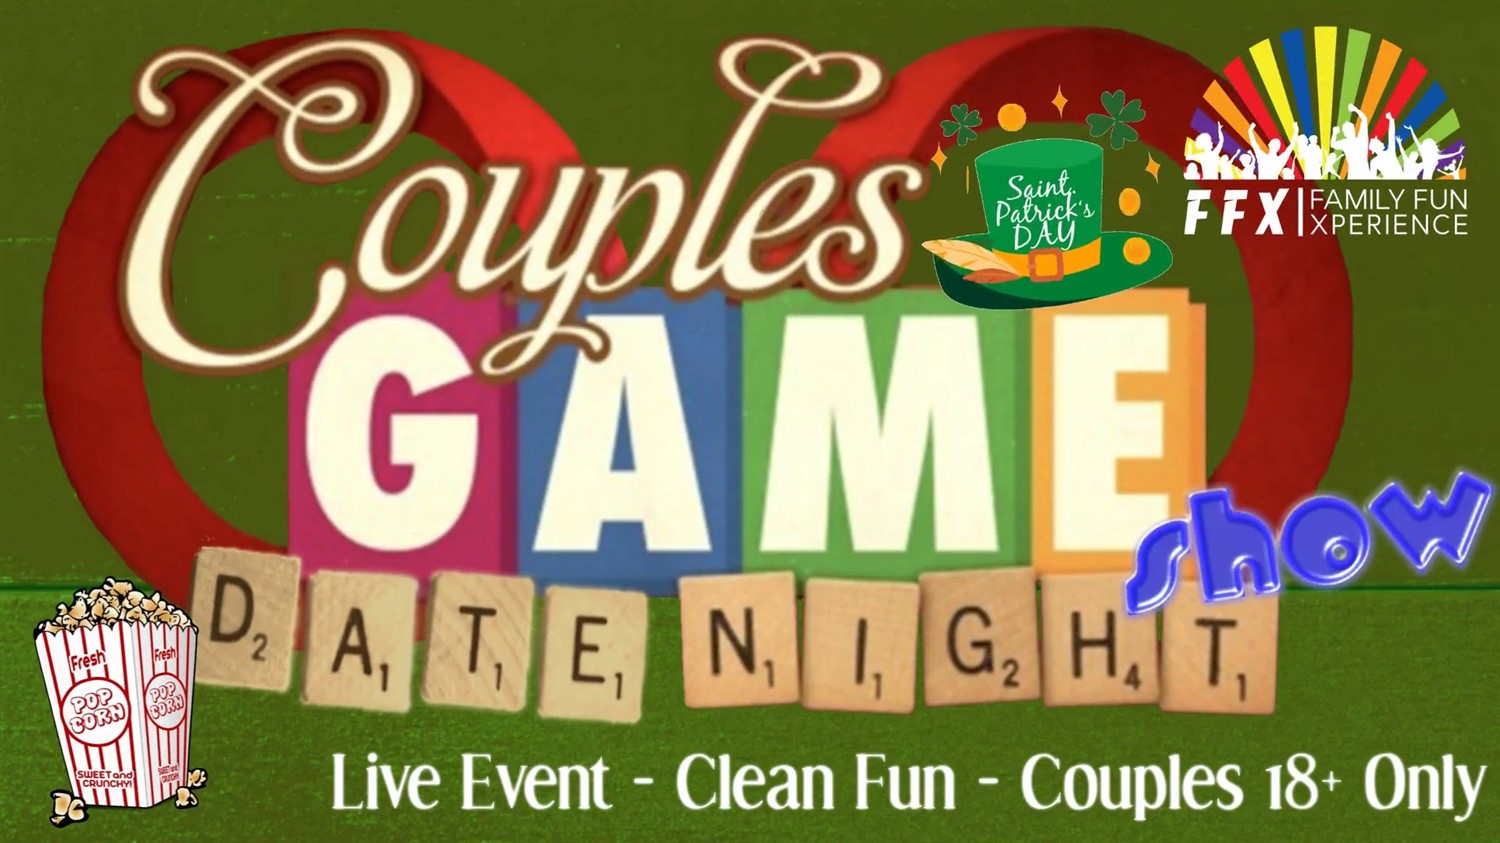 COUPLES DATE NIGHT GAME SHOW 18+ Only on May 26, 19:00@FFX Theatre - Pick a seat, Buy tickets and Get information on Family Fun Xperience tickets.ffxshow.org